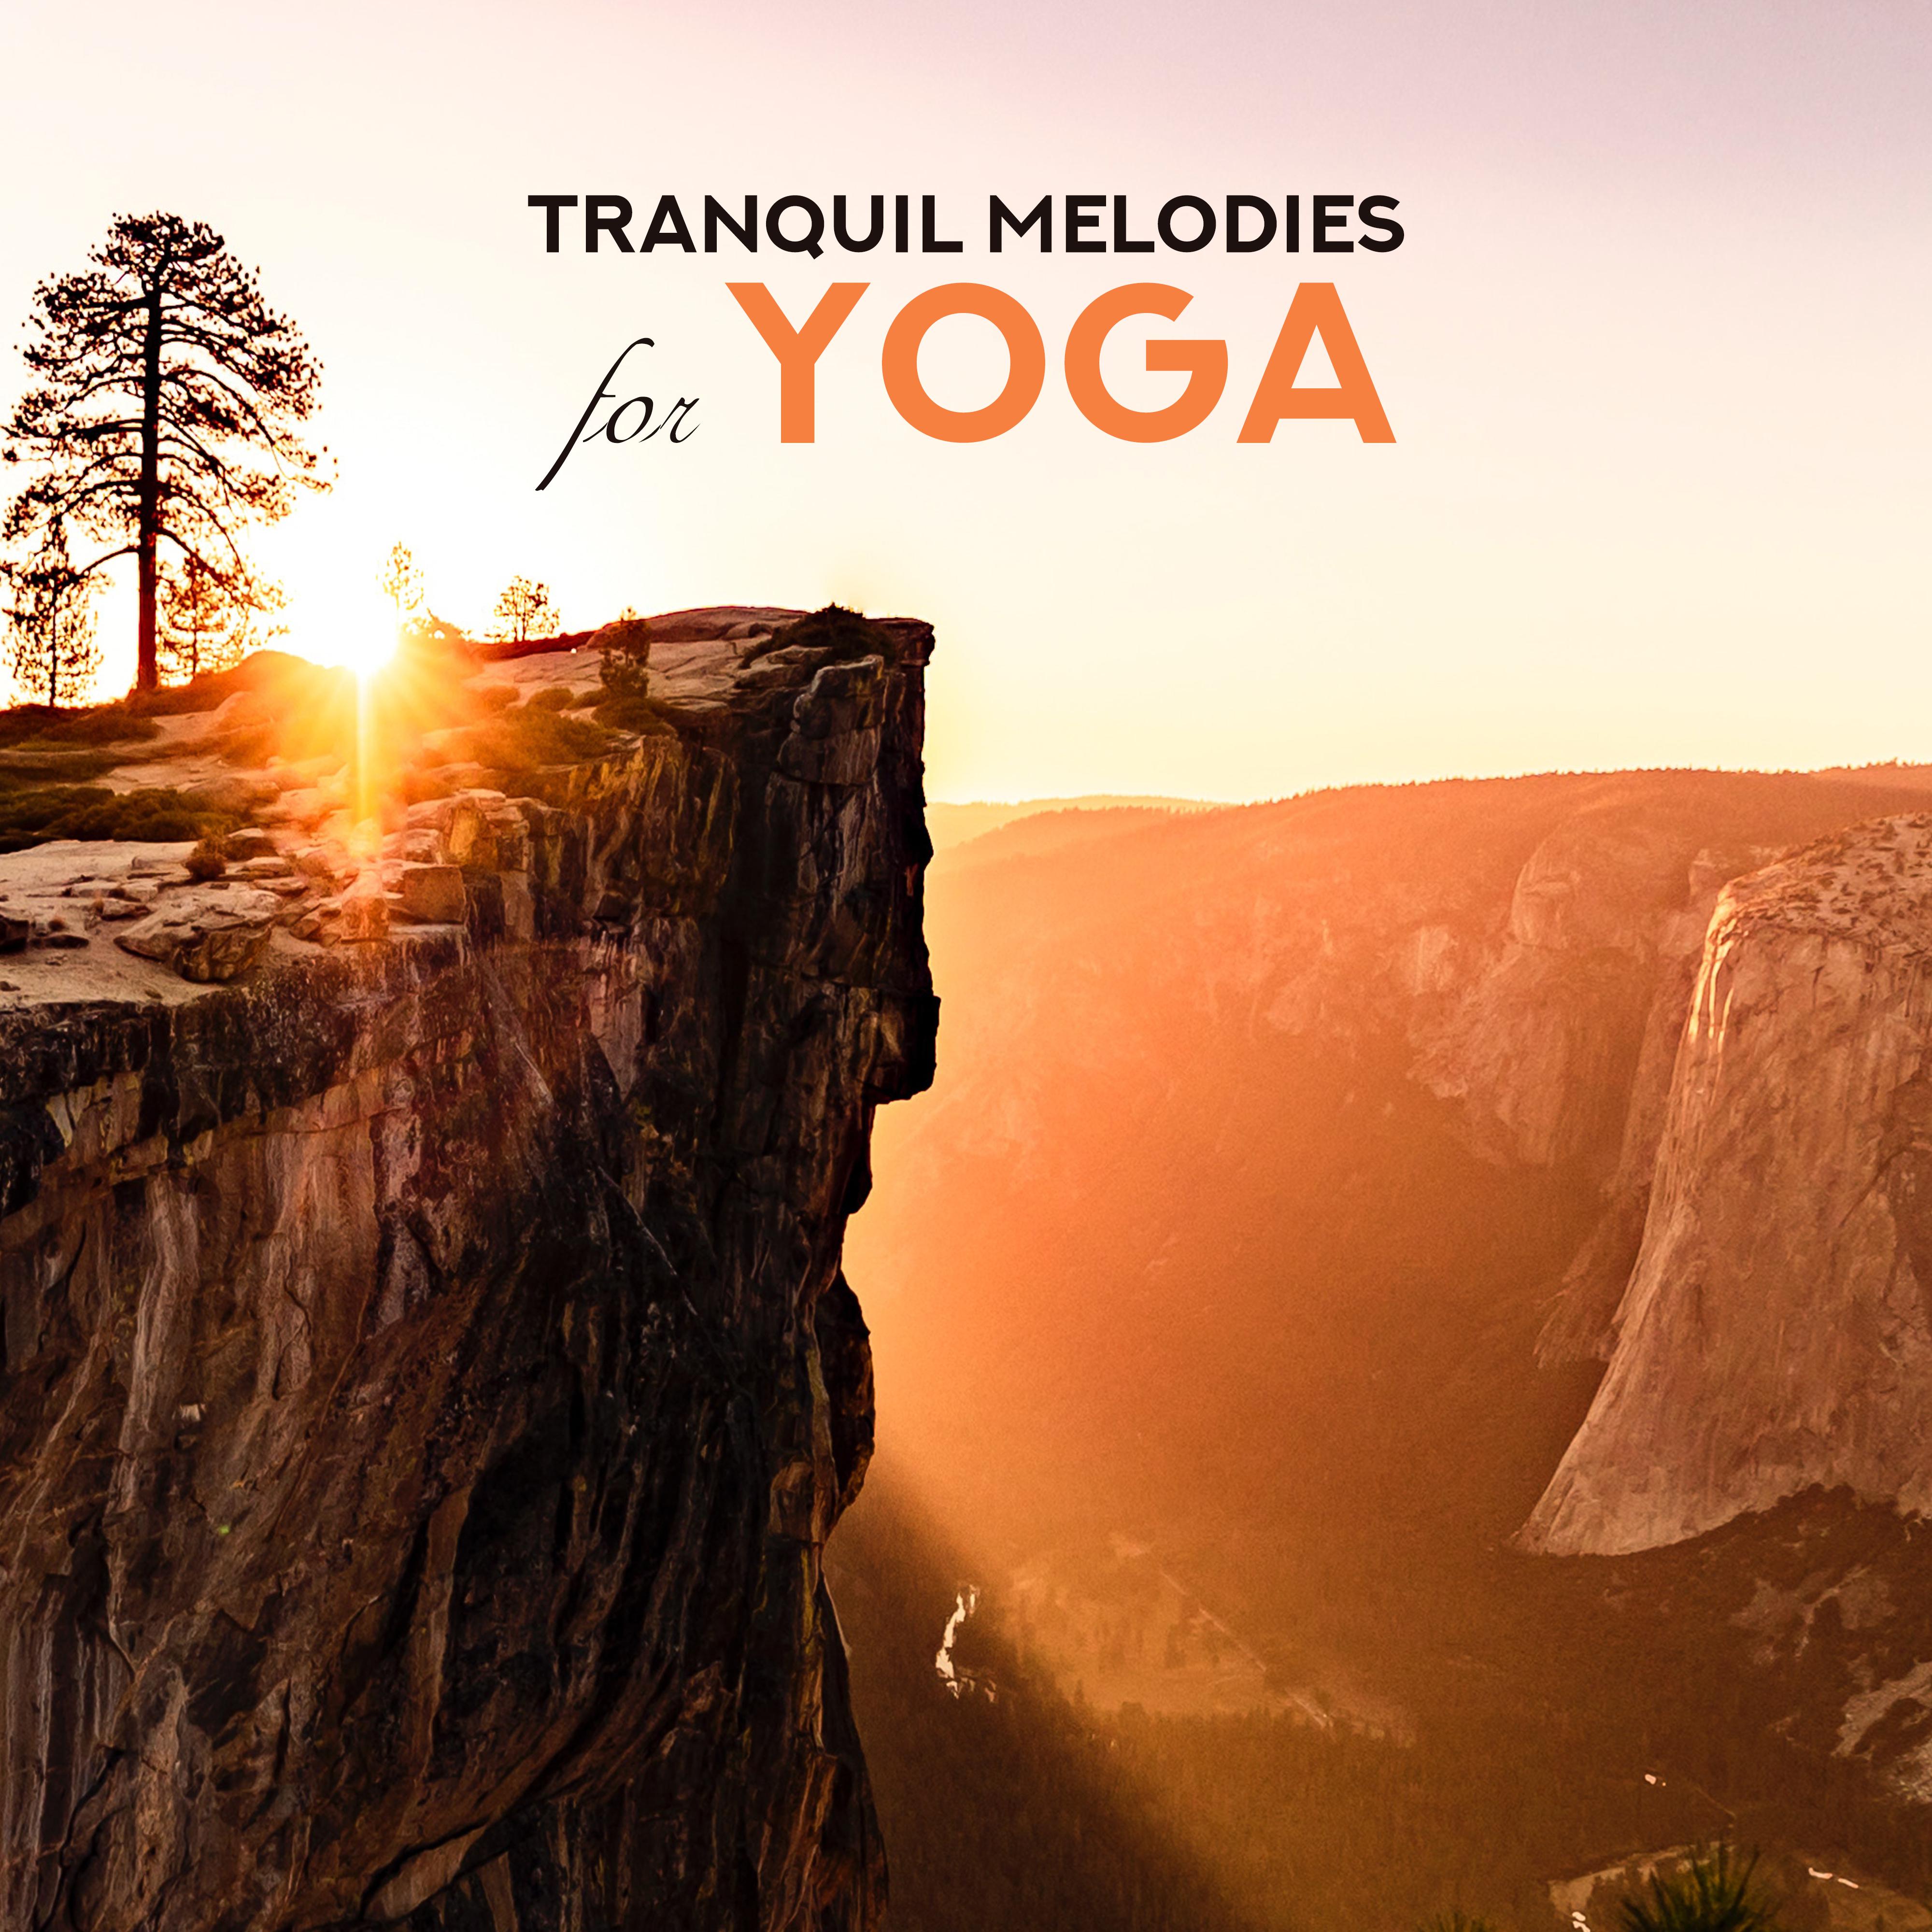 Tranquil Melodies for Yoga  Relaxing Music for Meditation, Spiritual Awakening, Sleep, Calm Down, Pure Mind, Deep Relaxation, Classical Meditation Music, Zen